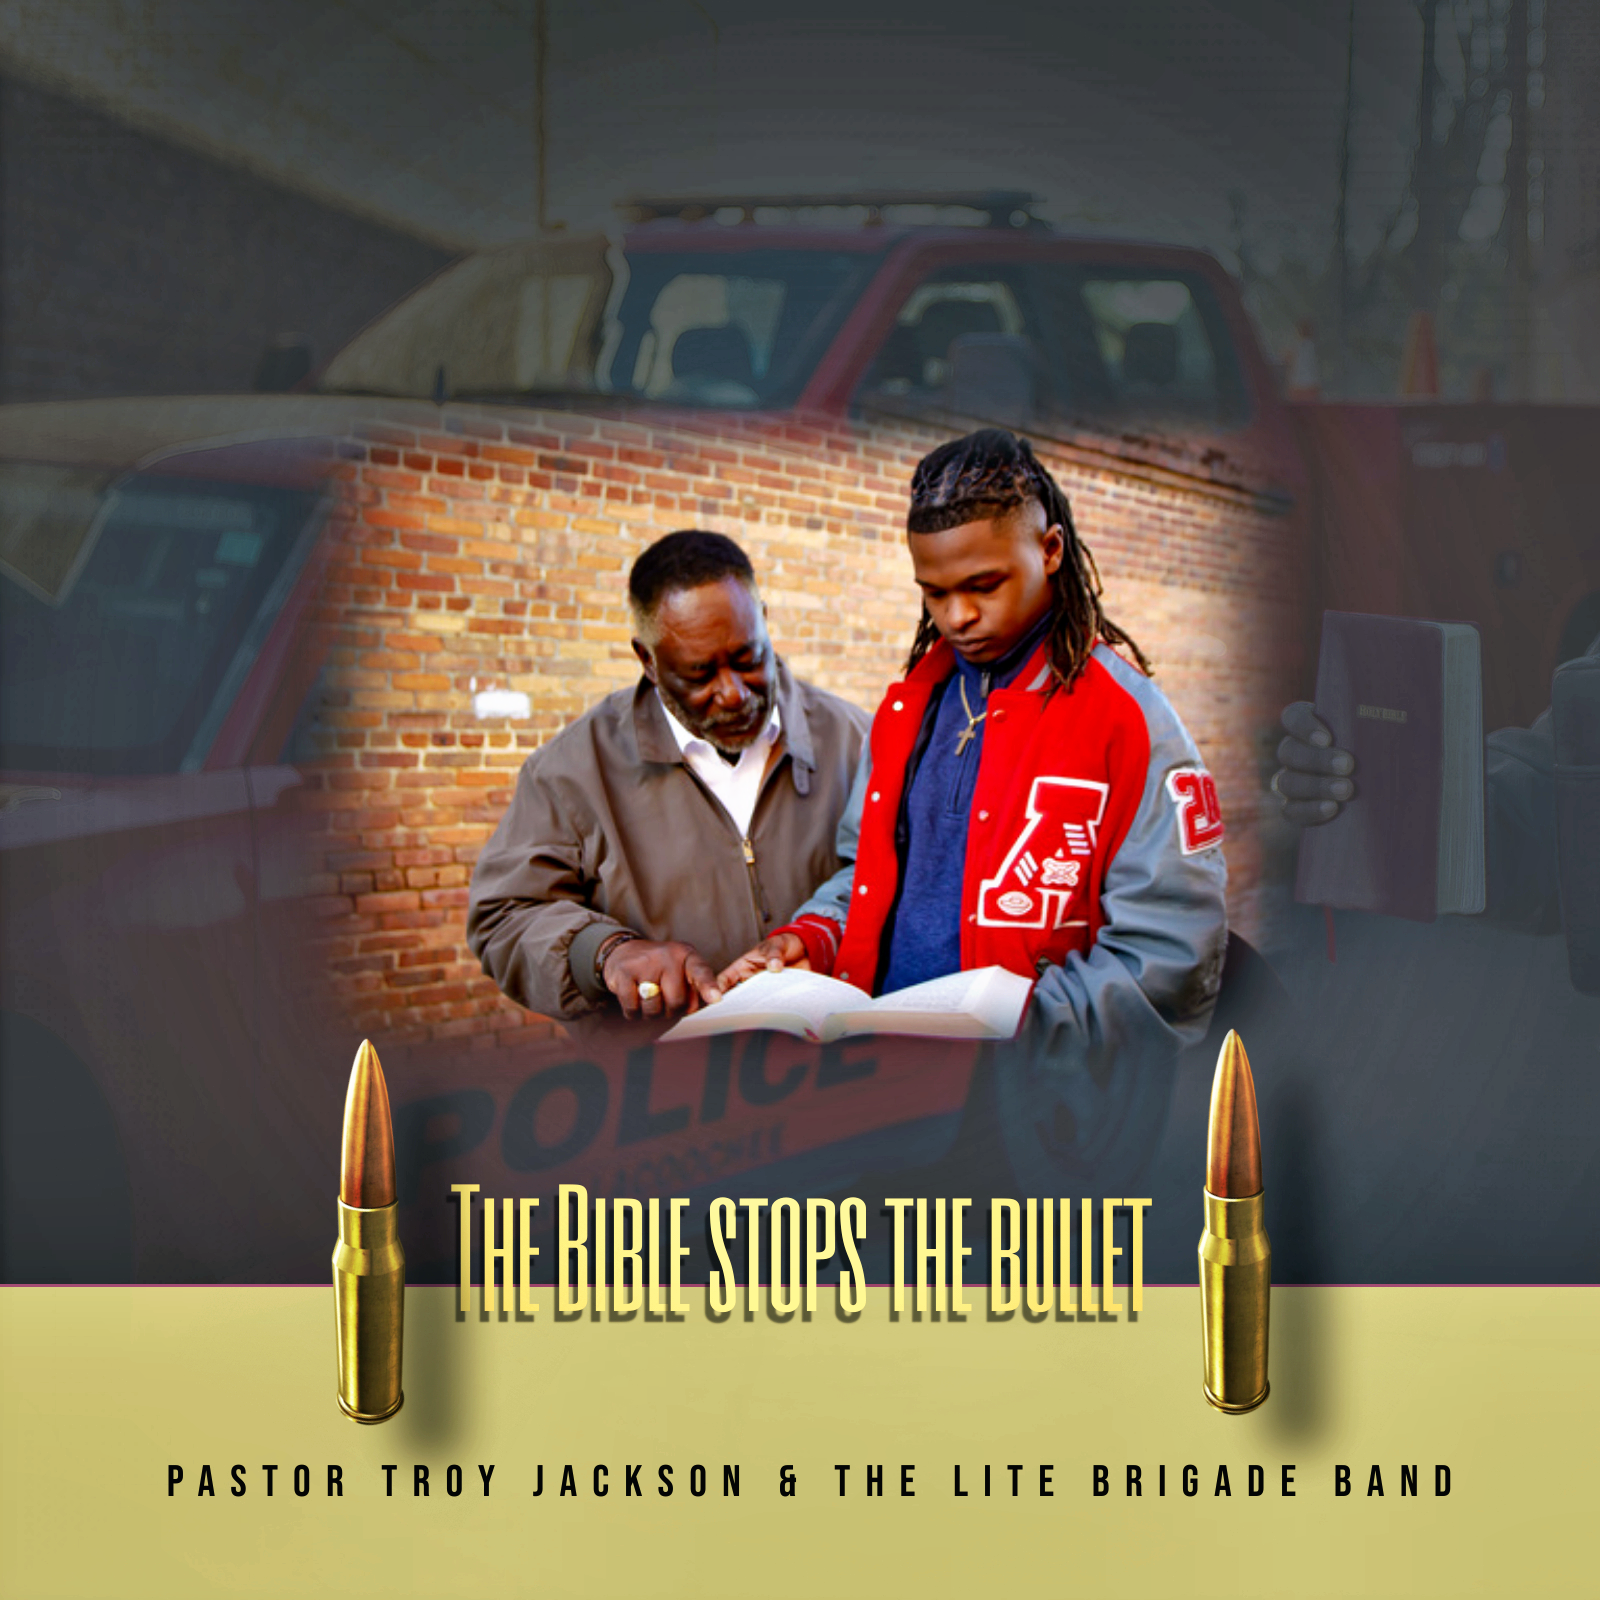 Pastor Troy Jackson & The Lite Brigade Band - The Bible Stops The Bullet